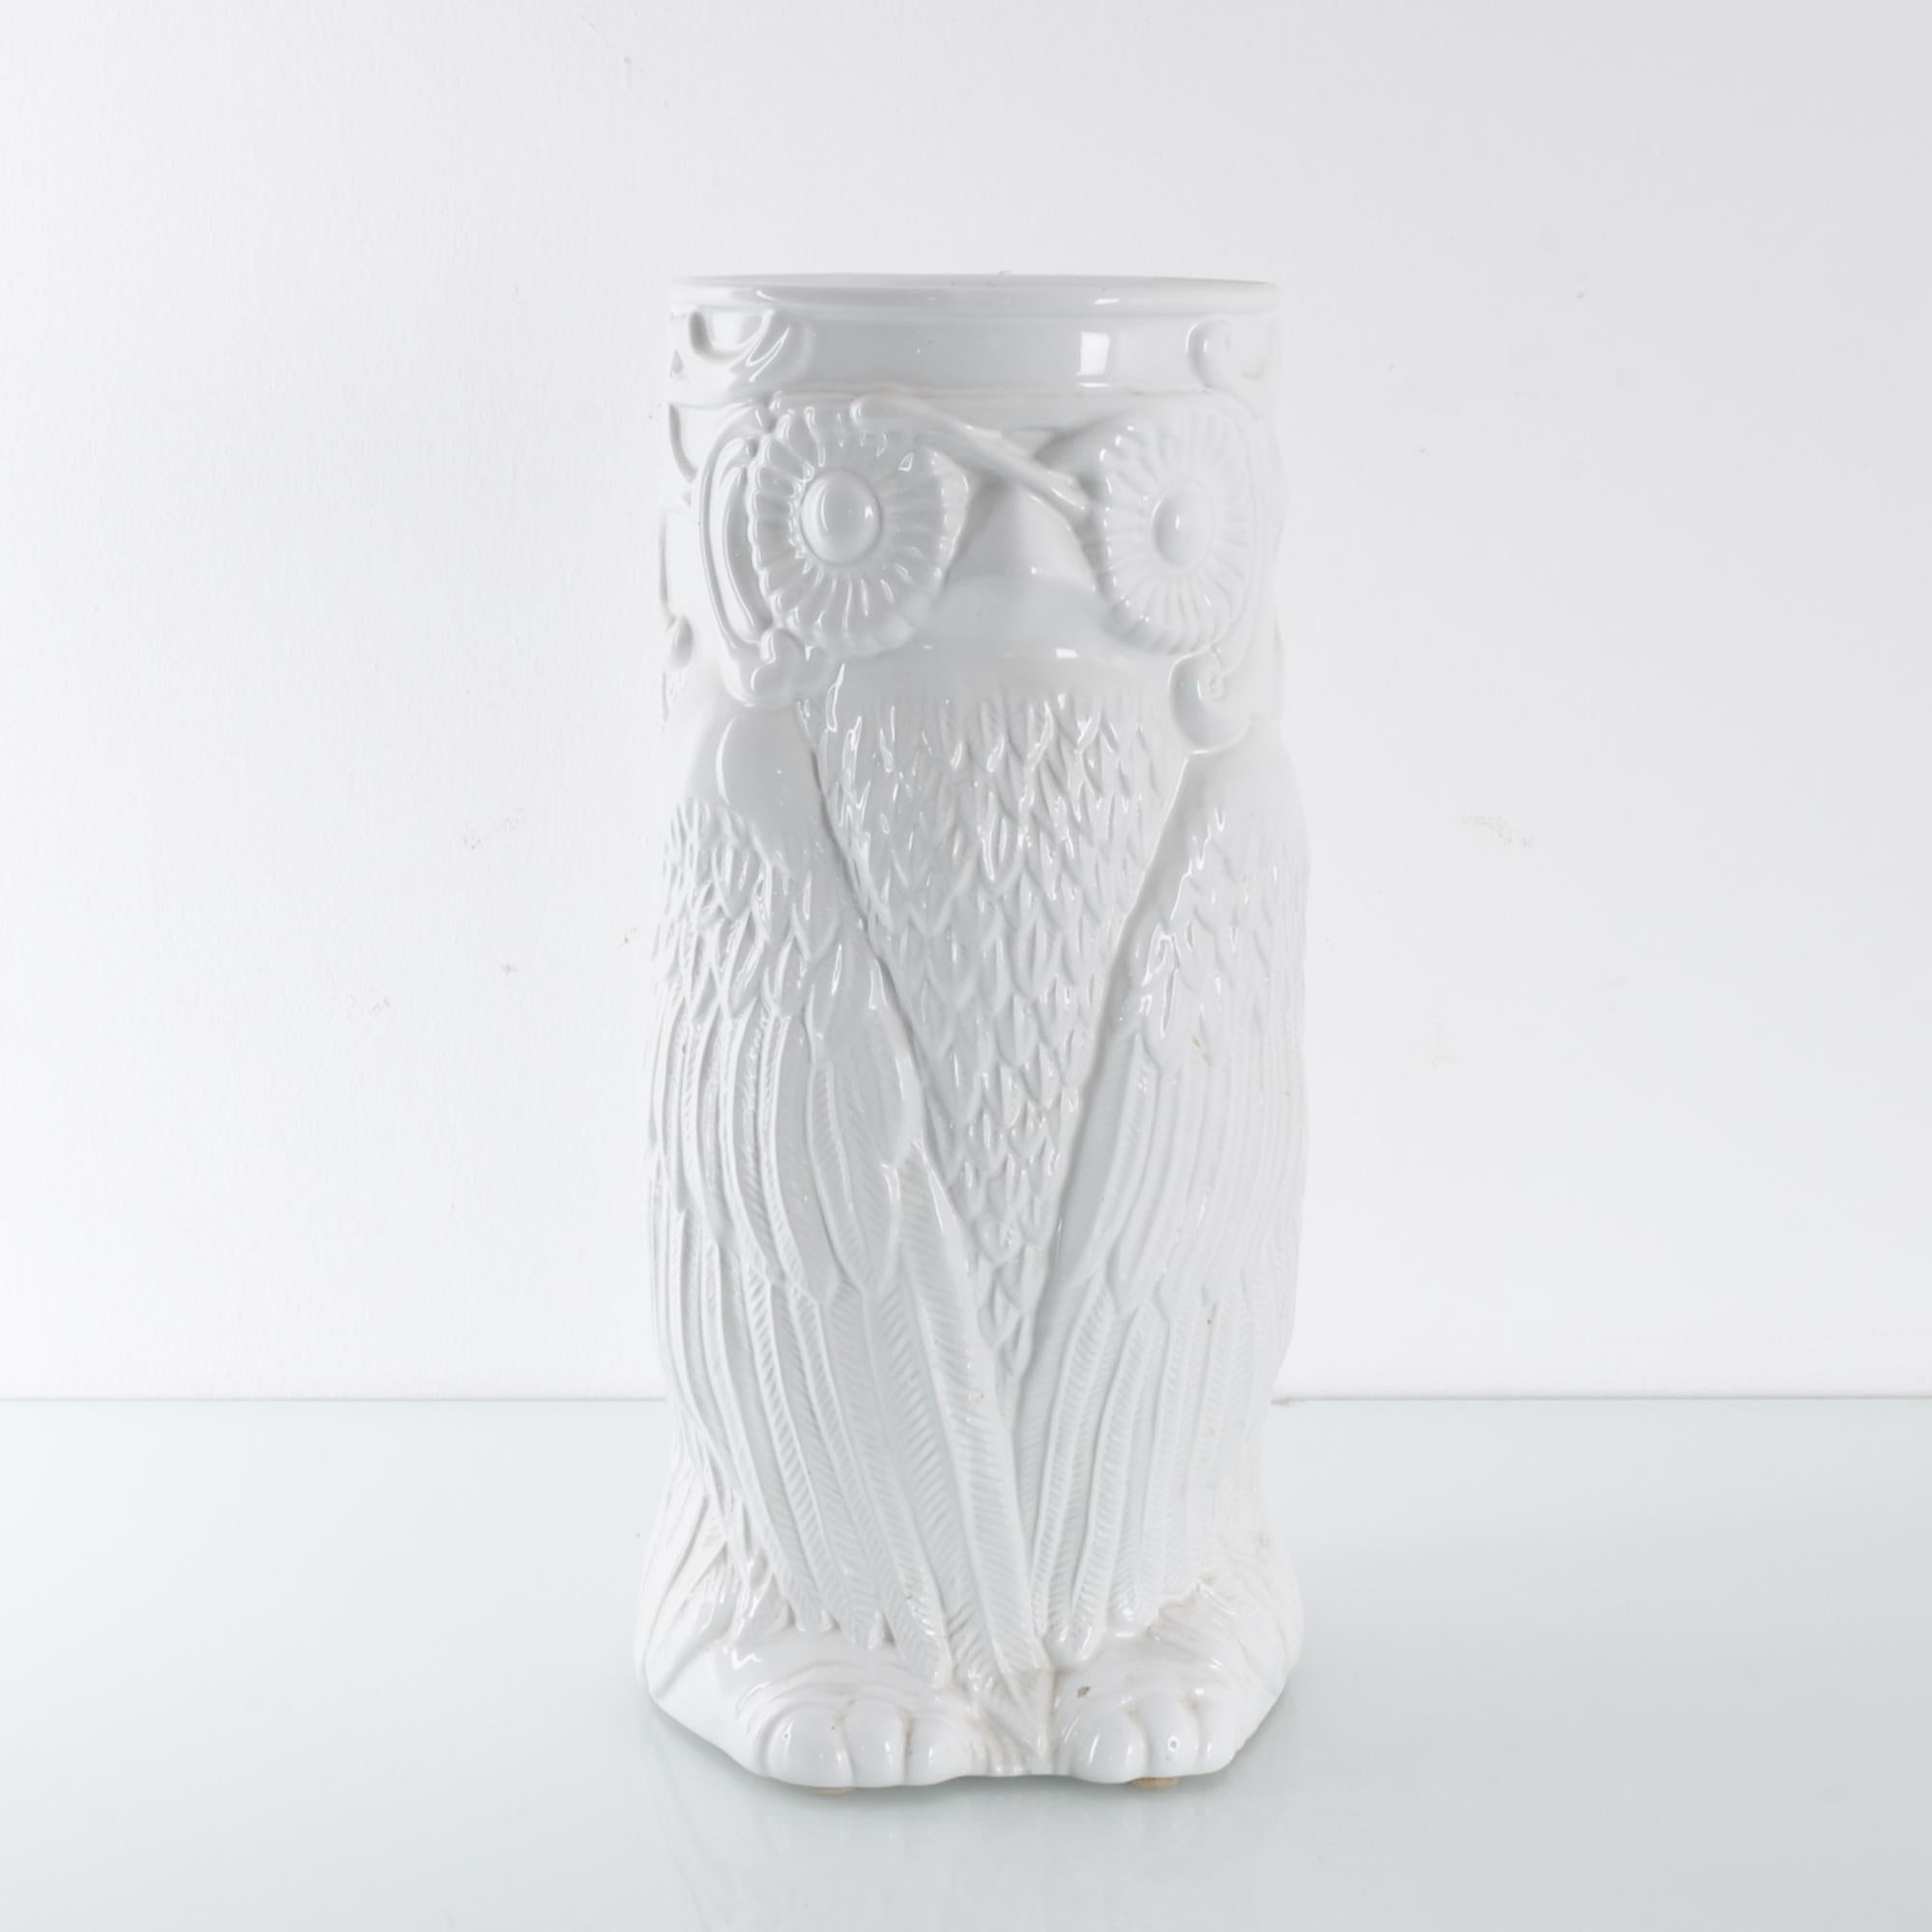 A ceramic vase produced in Belgium, circa 1960. A white 45cm ceramic in the shape of an owl standing alert, wing-wrapped. Fine detail in the relief etching out every feather. Much like wisdom itself, this understated piece emanates a cool